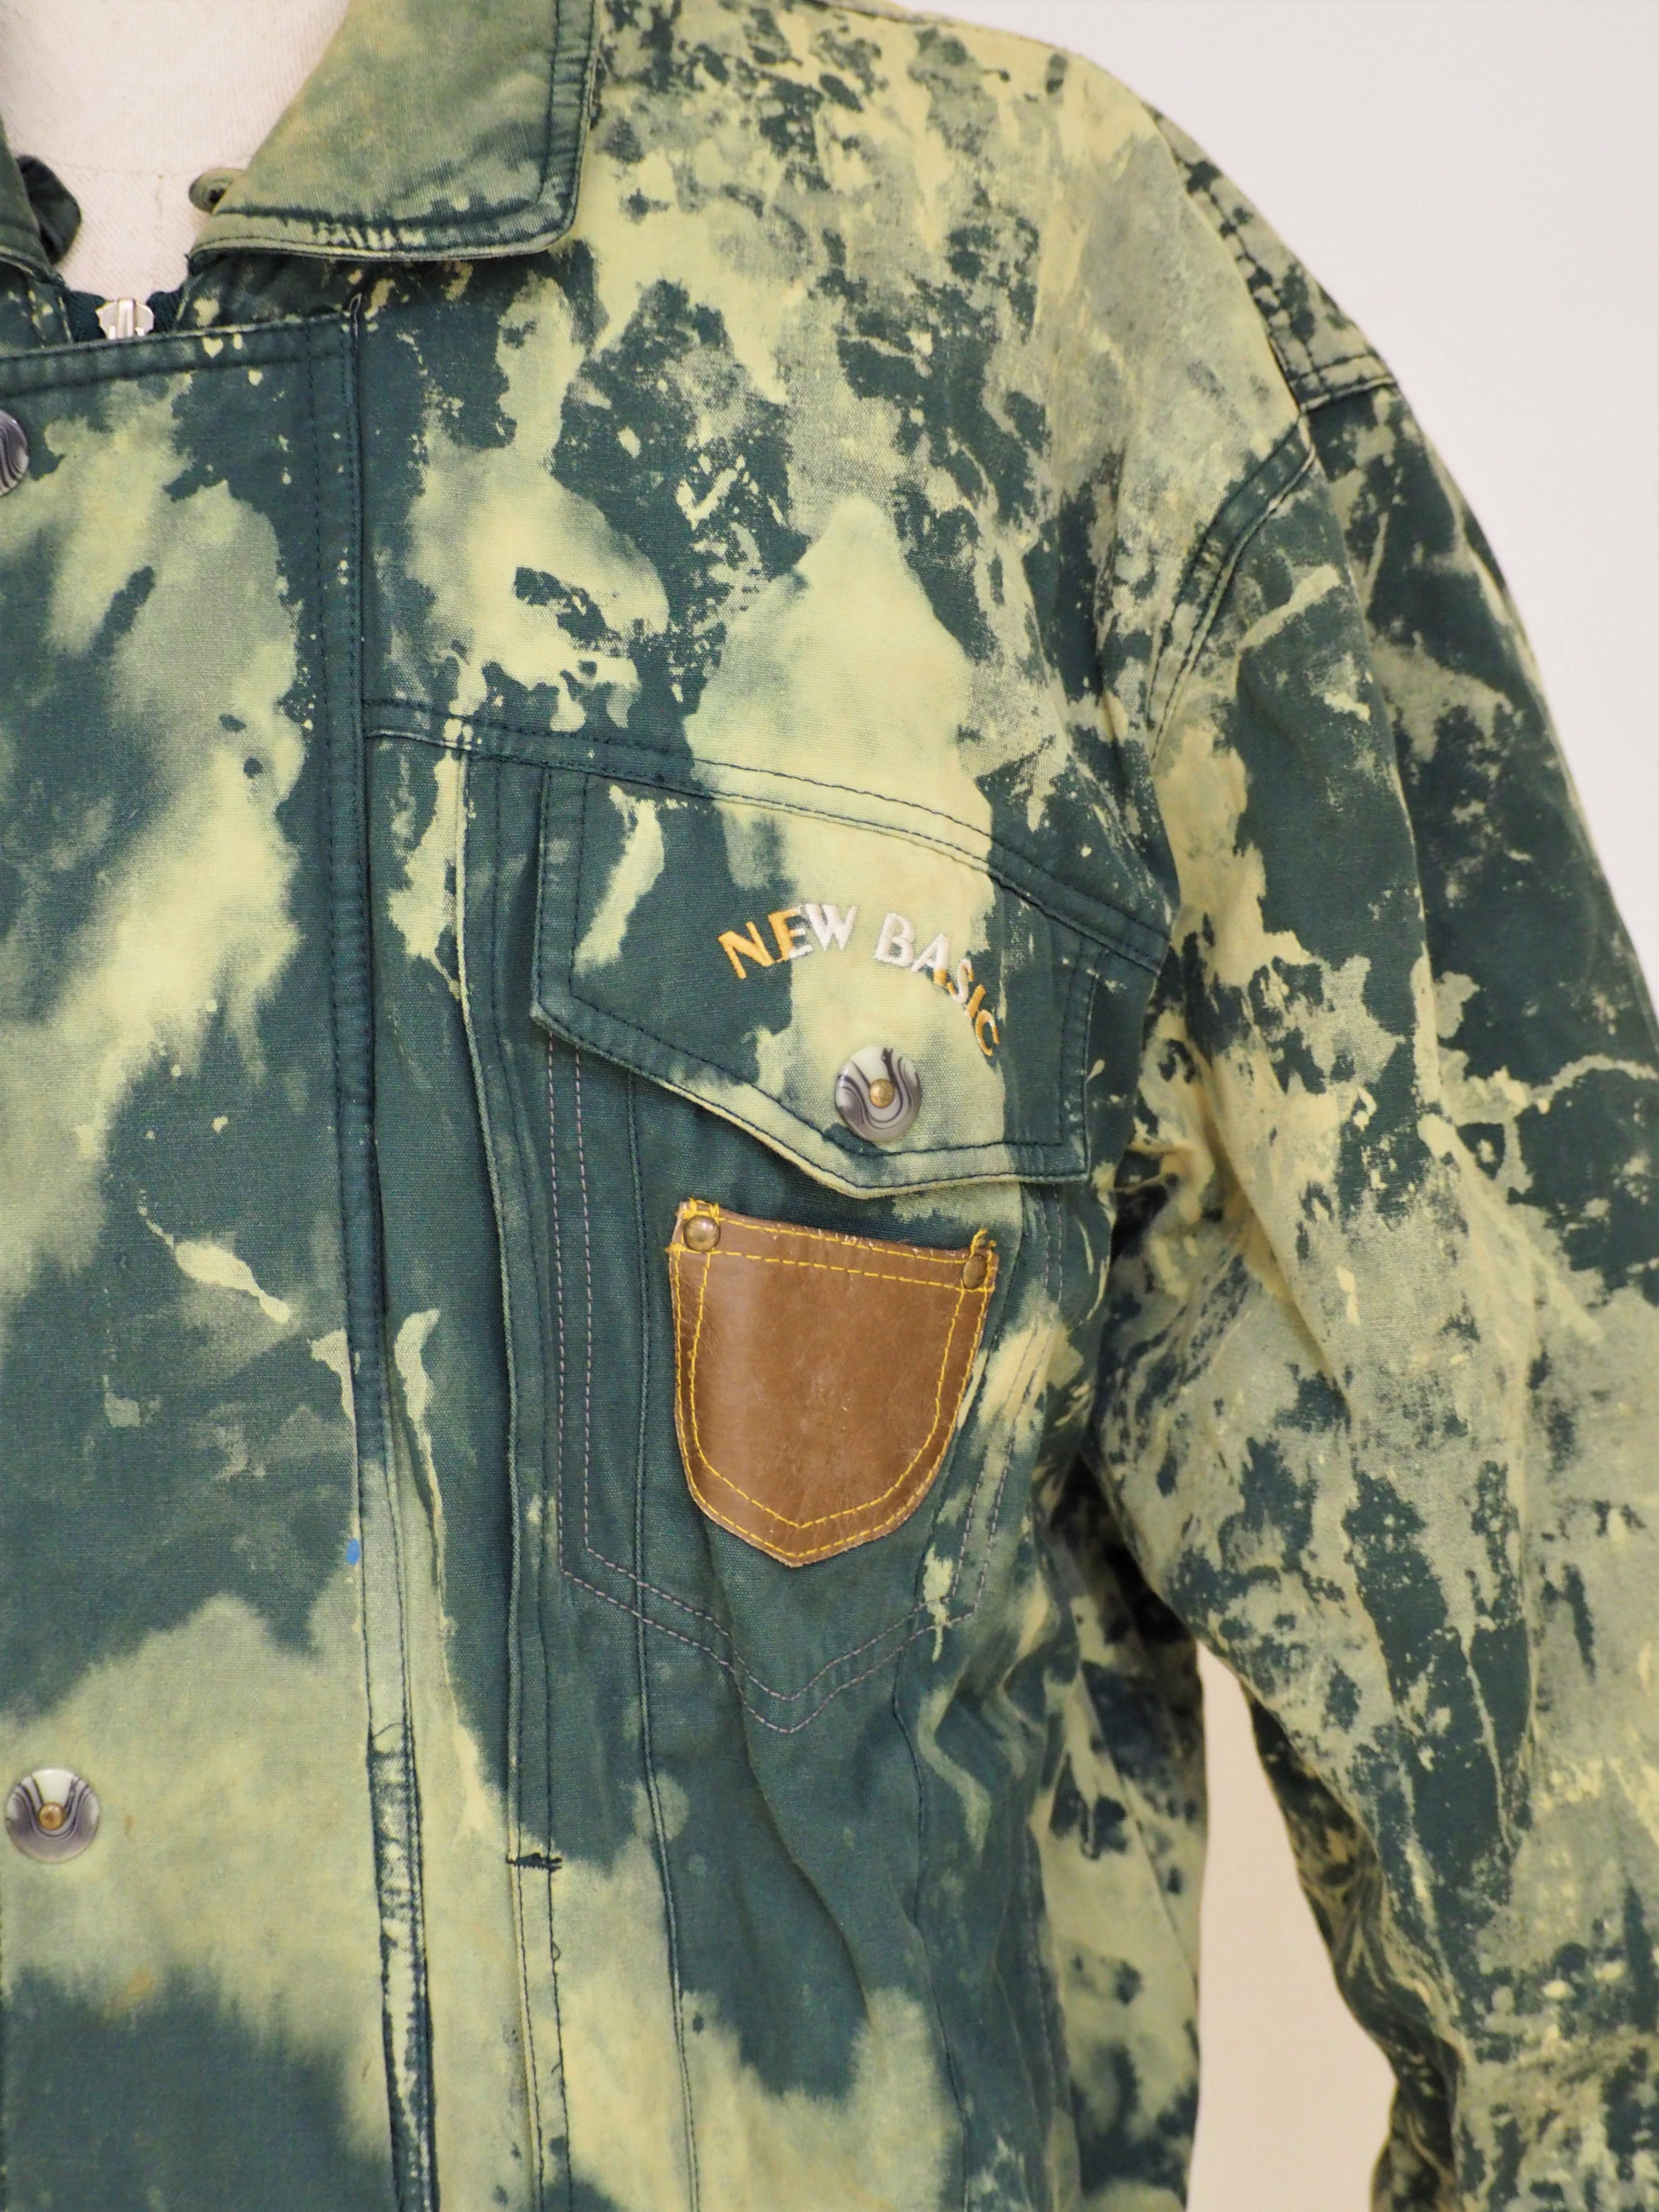 1990s vintage Green bomber jacket
composition: wool and jacket
